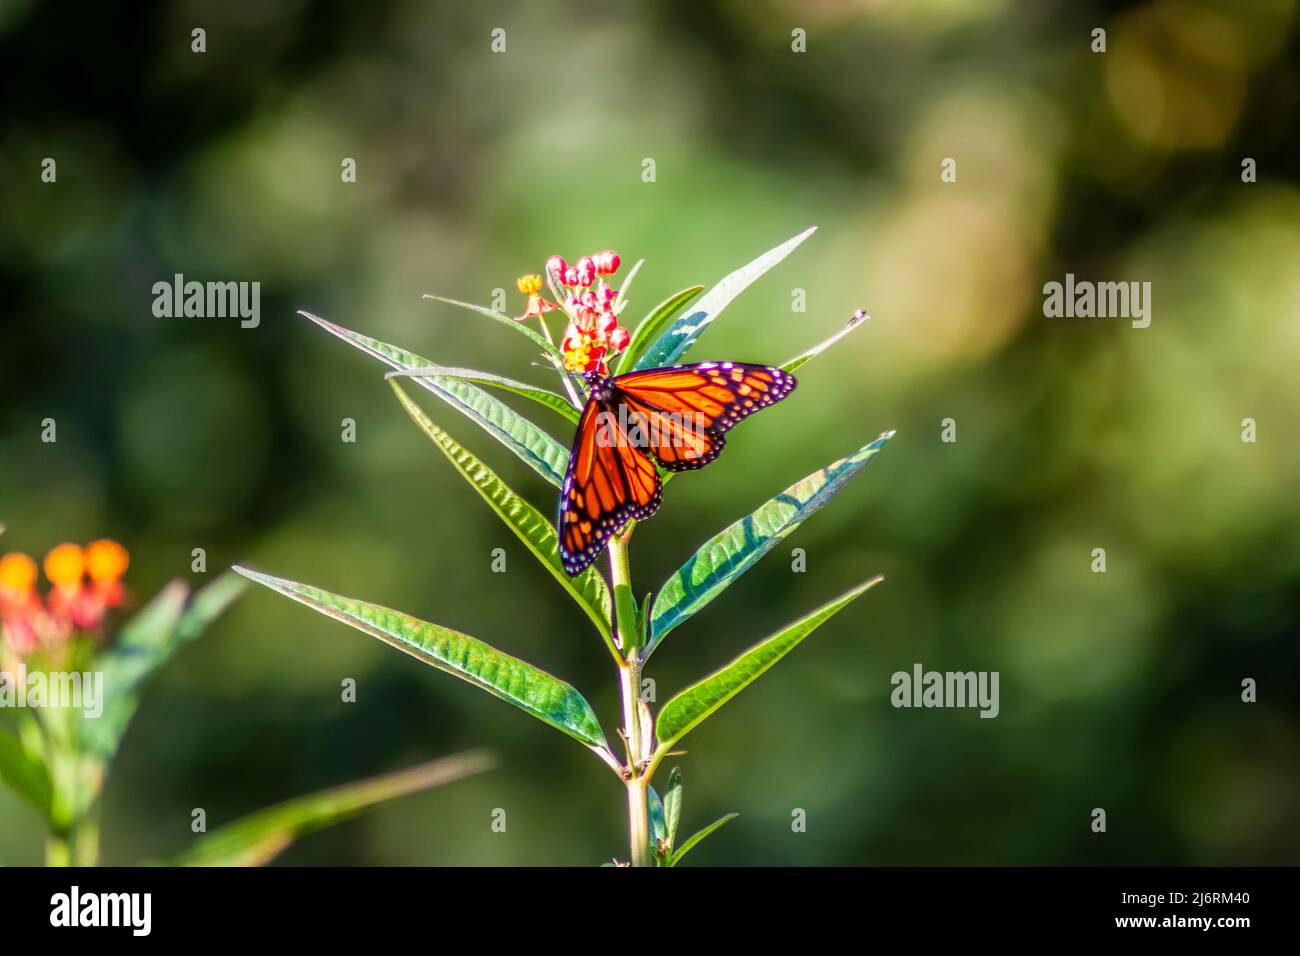 Monarch butterfly sipping nectar from an orange butterfly flower against a vibrant green bokah garden background. Stock Photo